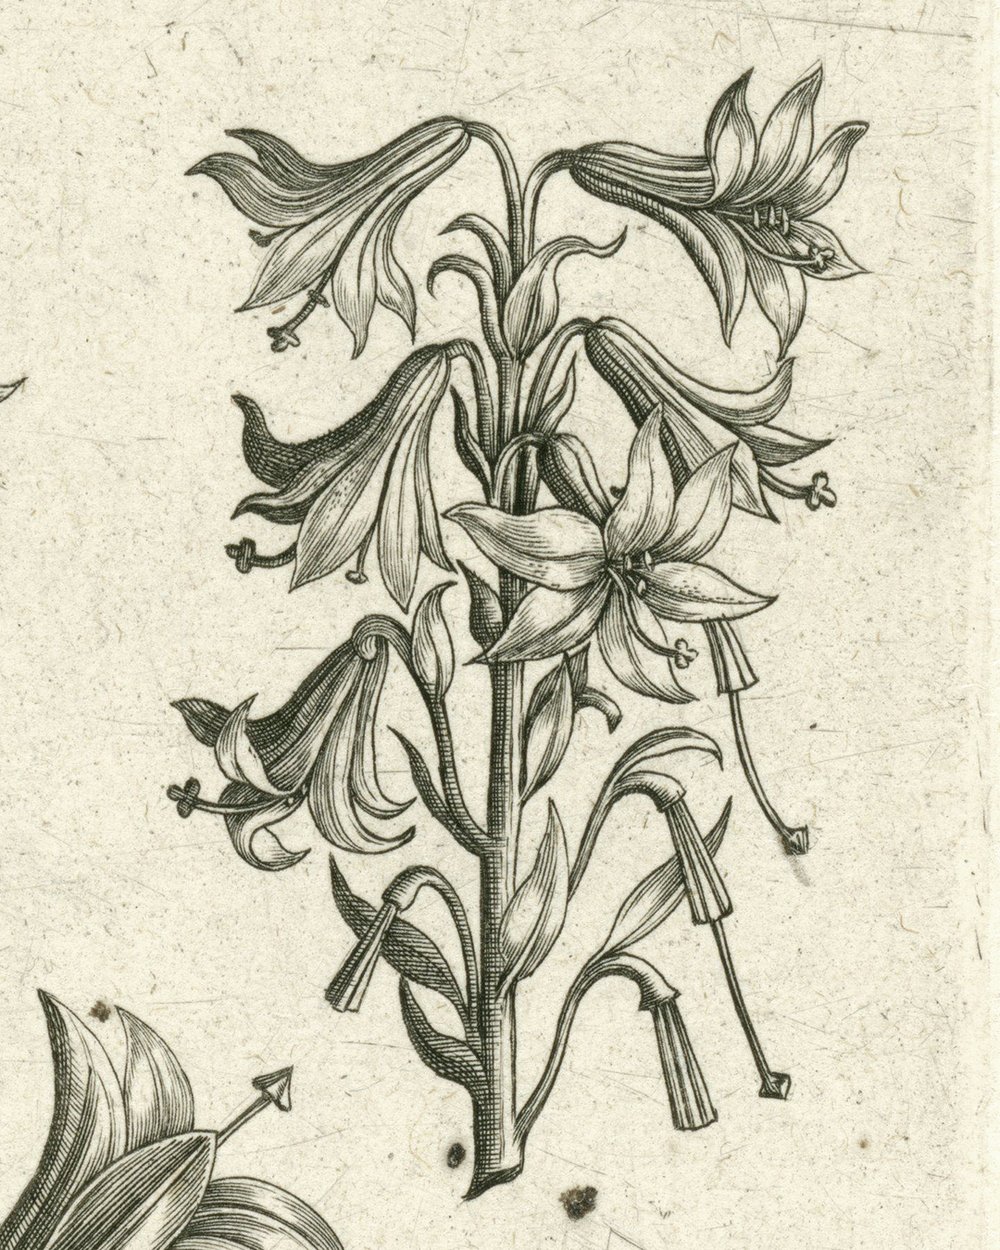 ''Four large lilies and some smaller flowers'' (1570 - 1618)